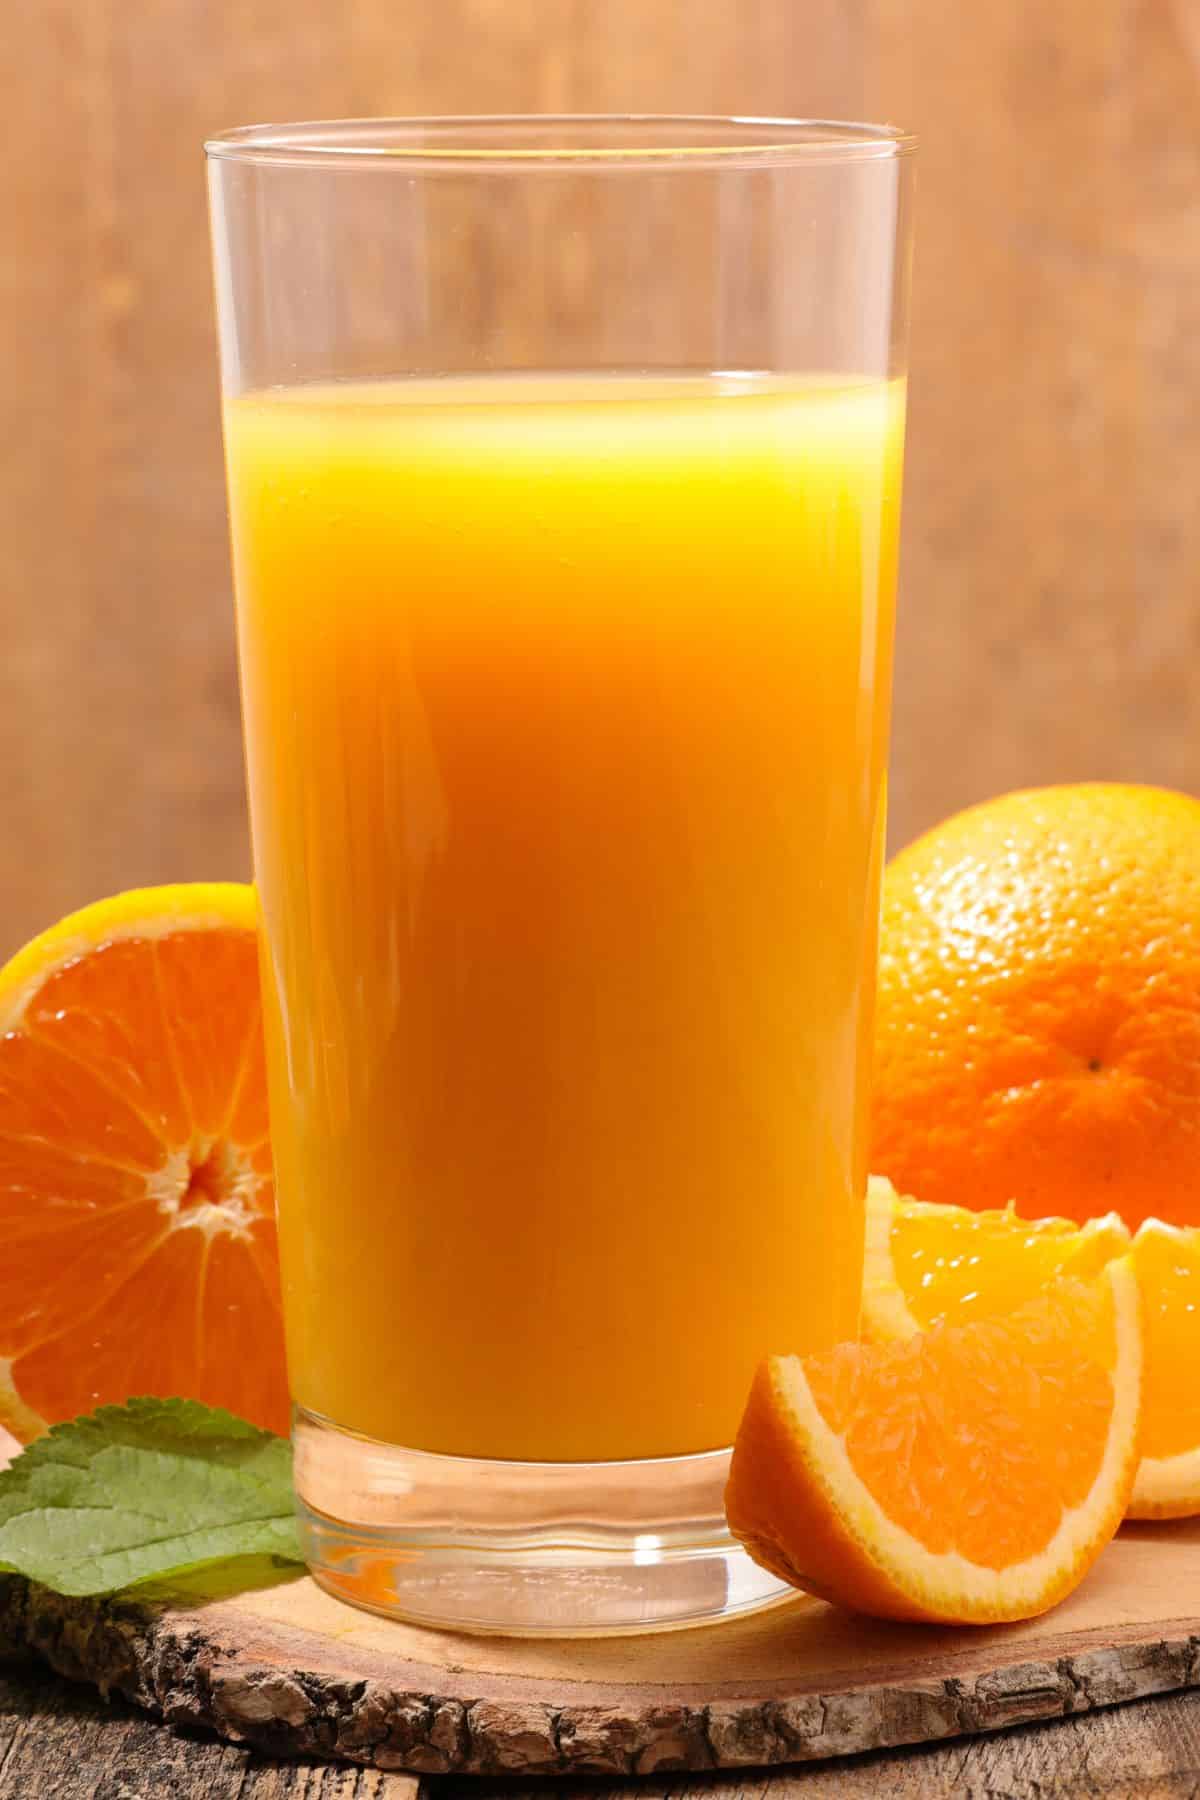 Tall glass filled with orange juice surrounded by orange slices.